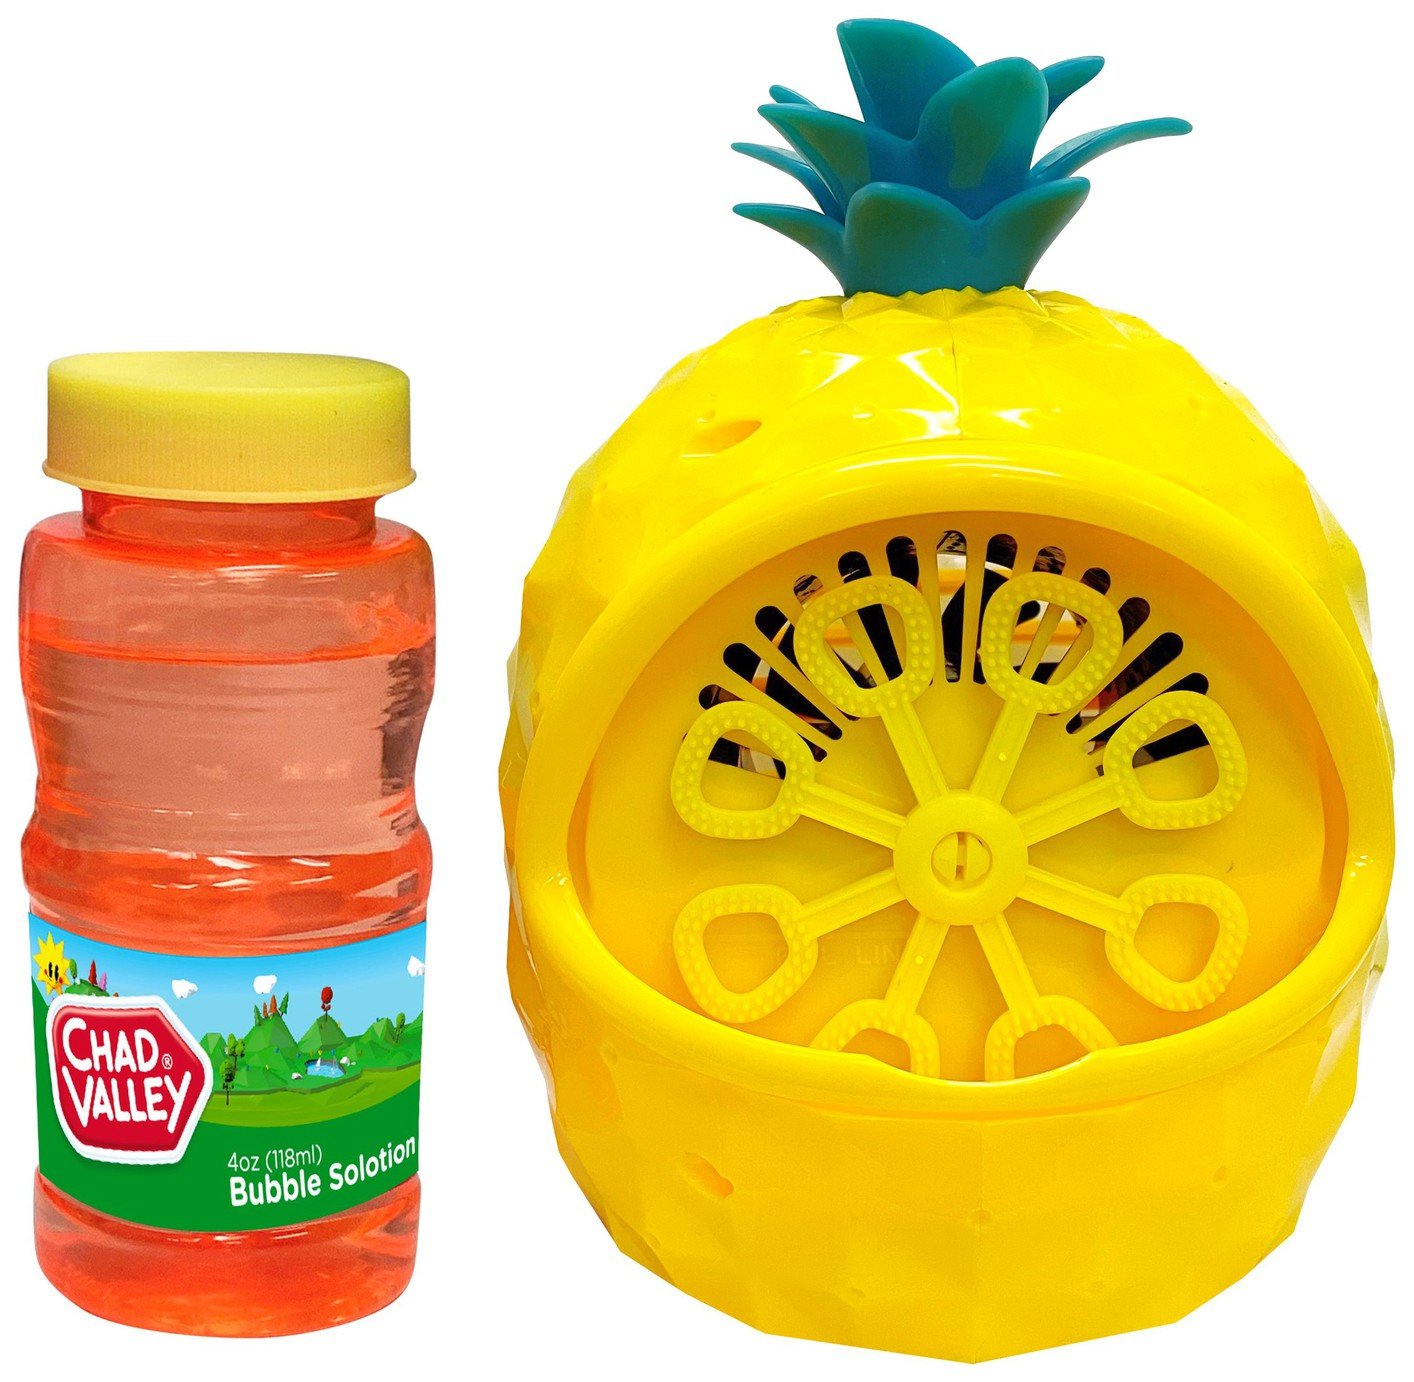 Chad Valley Pineapple Bubble Machine